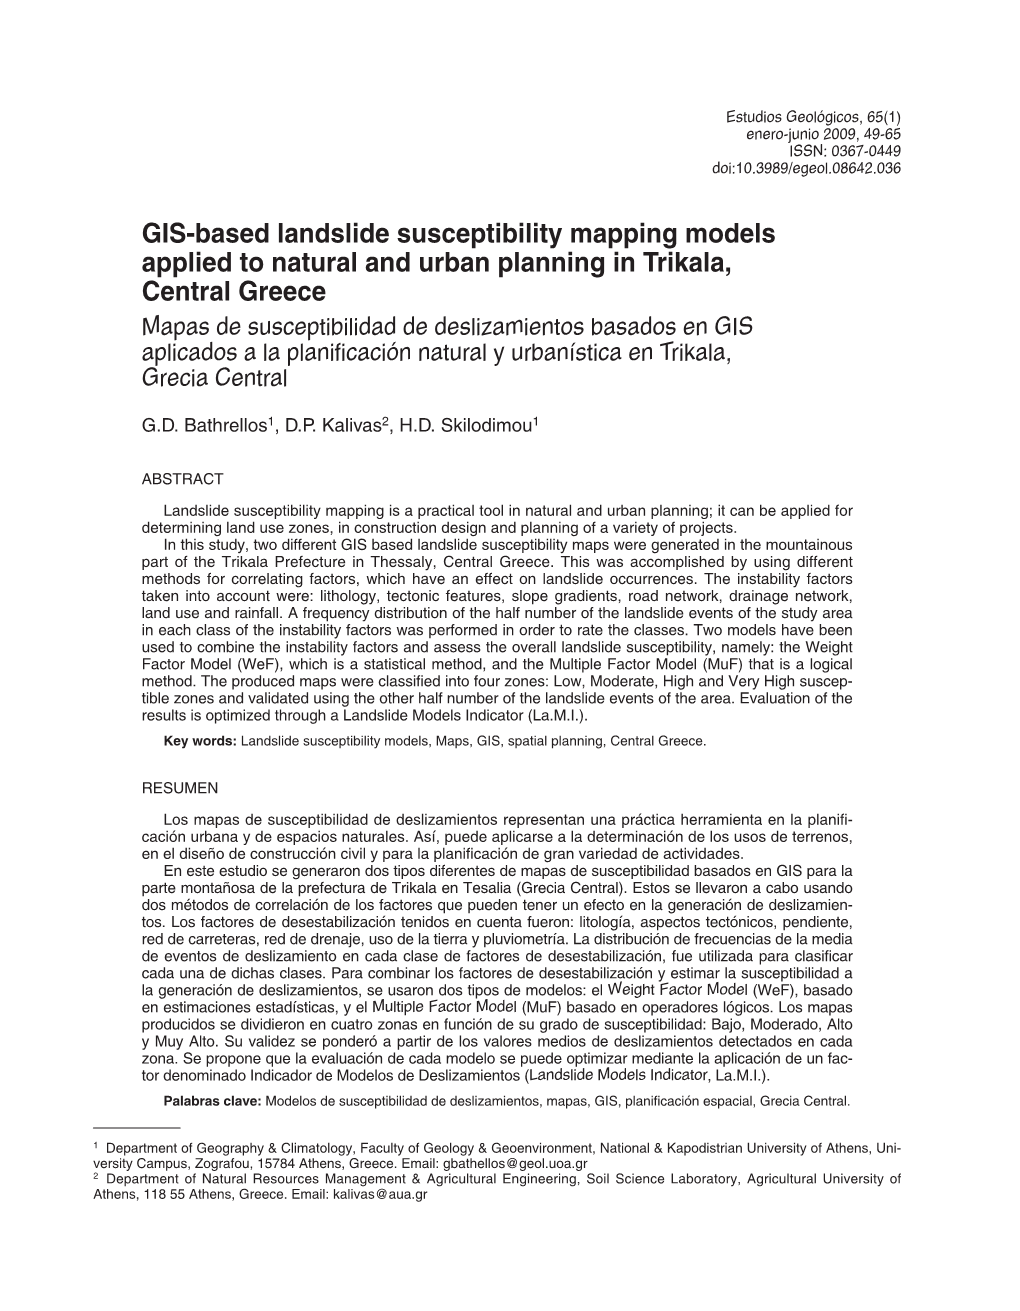 GIS-Based Landslide Susceptibility Mapping Models Applied to Natural